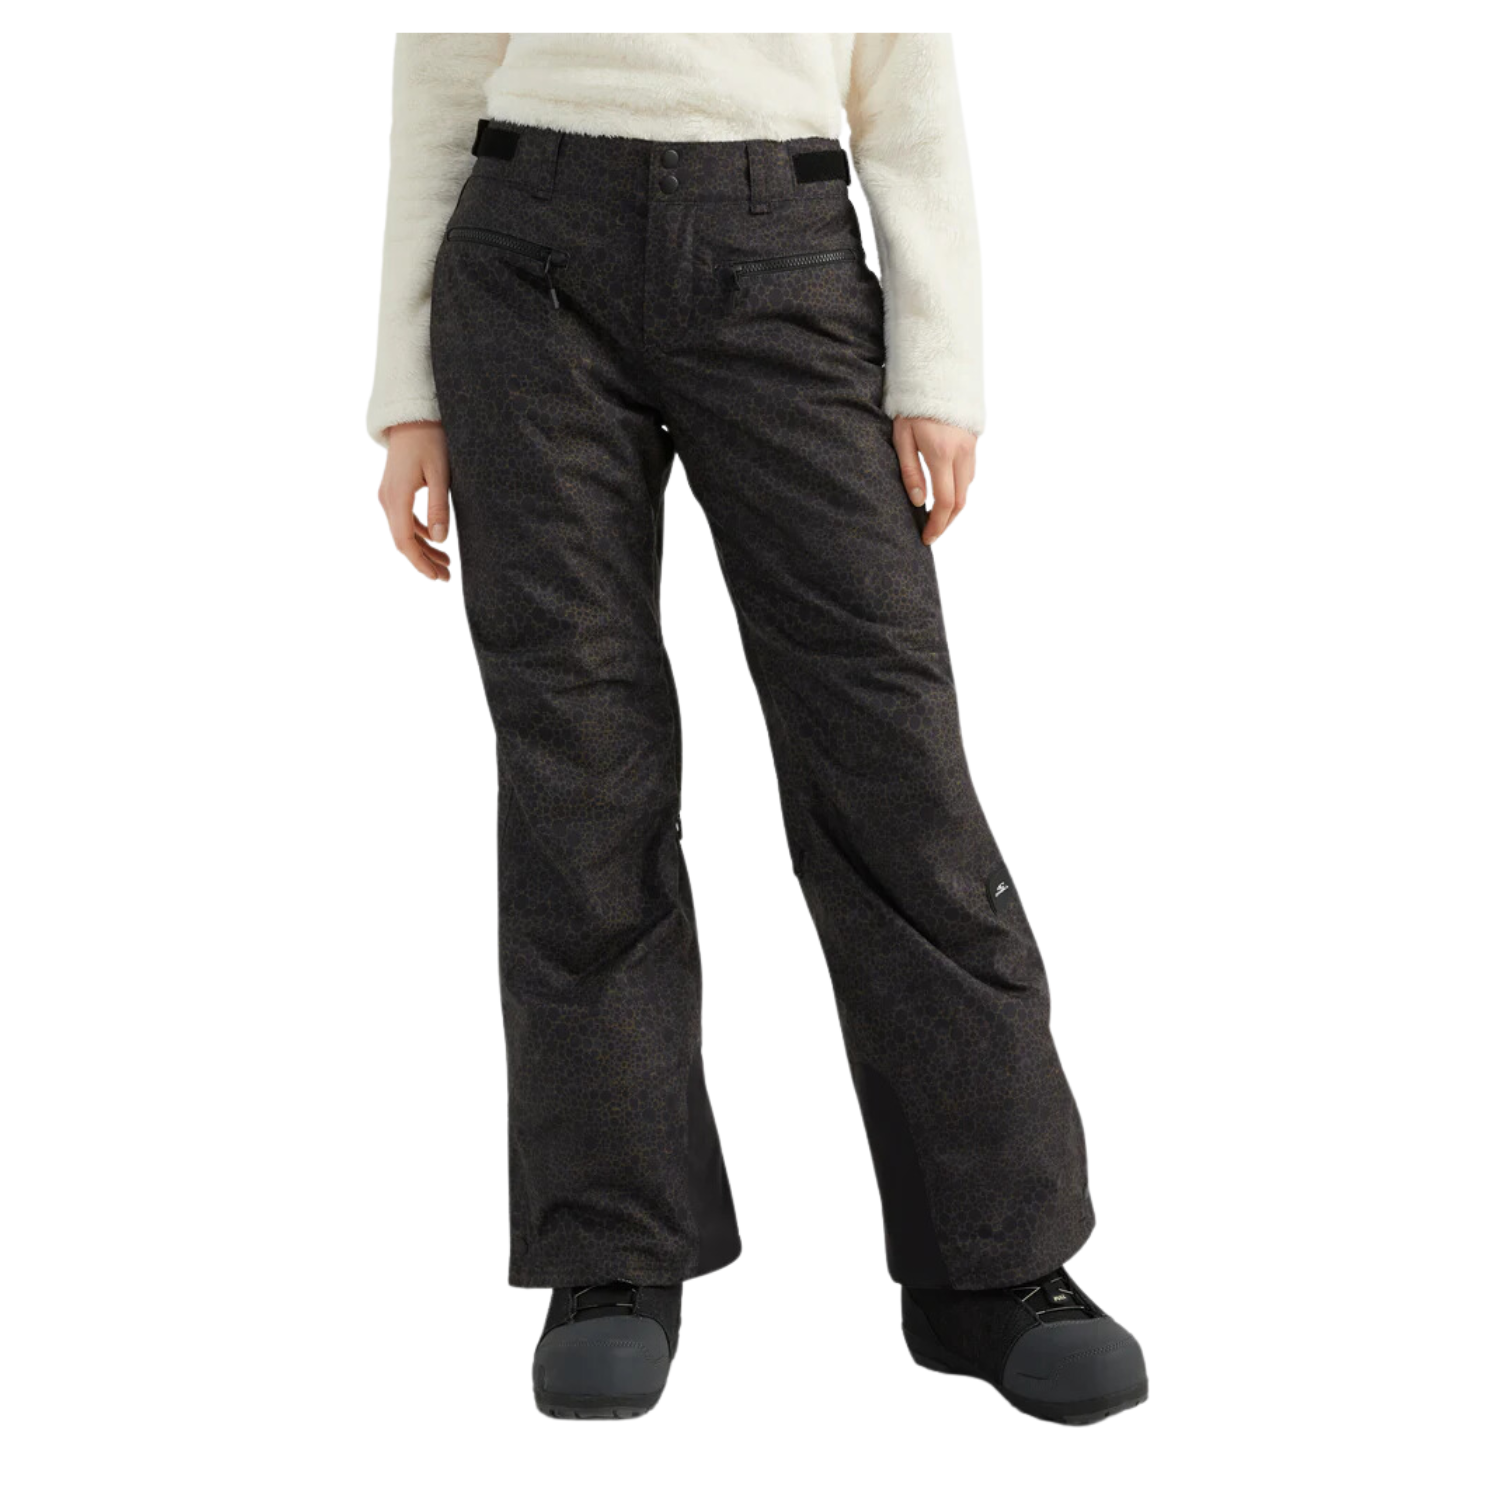 O'Neill Women's Glamour Insulated Pants - Grey Zoom In